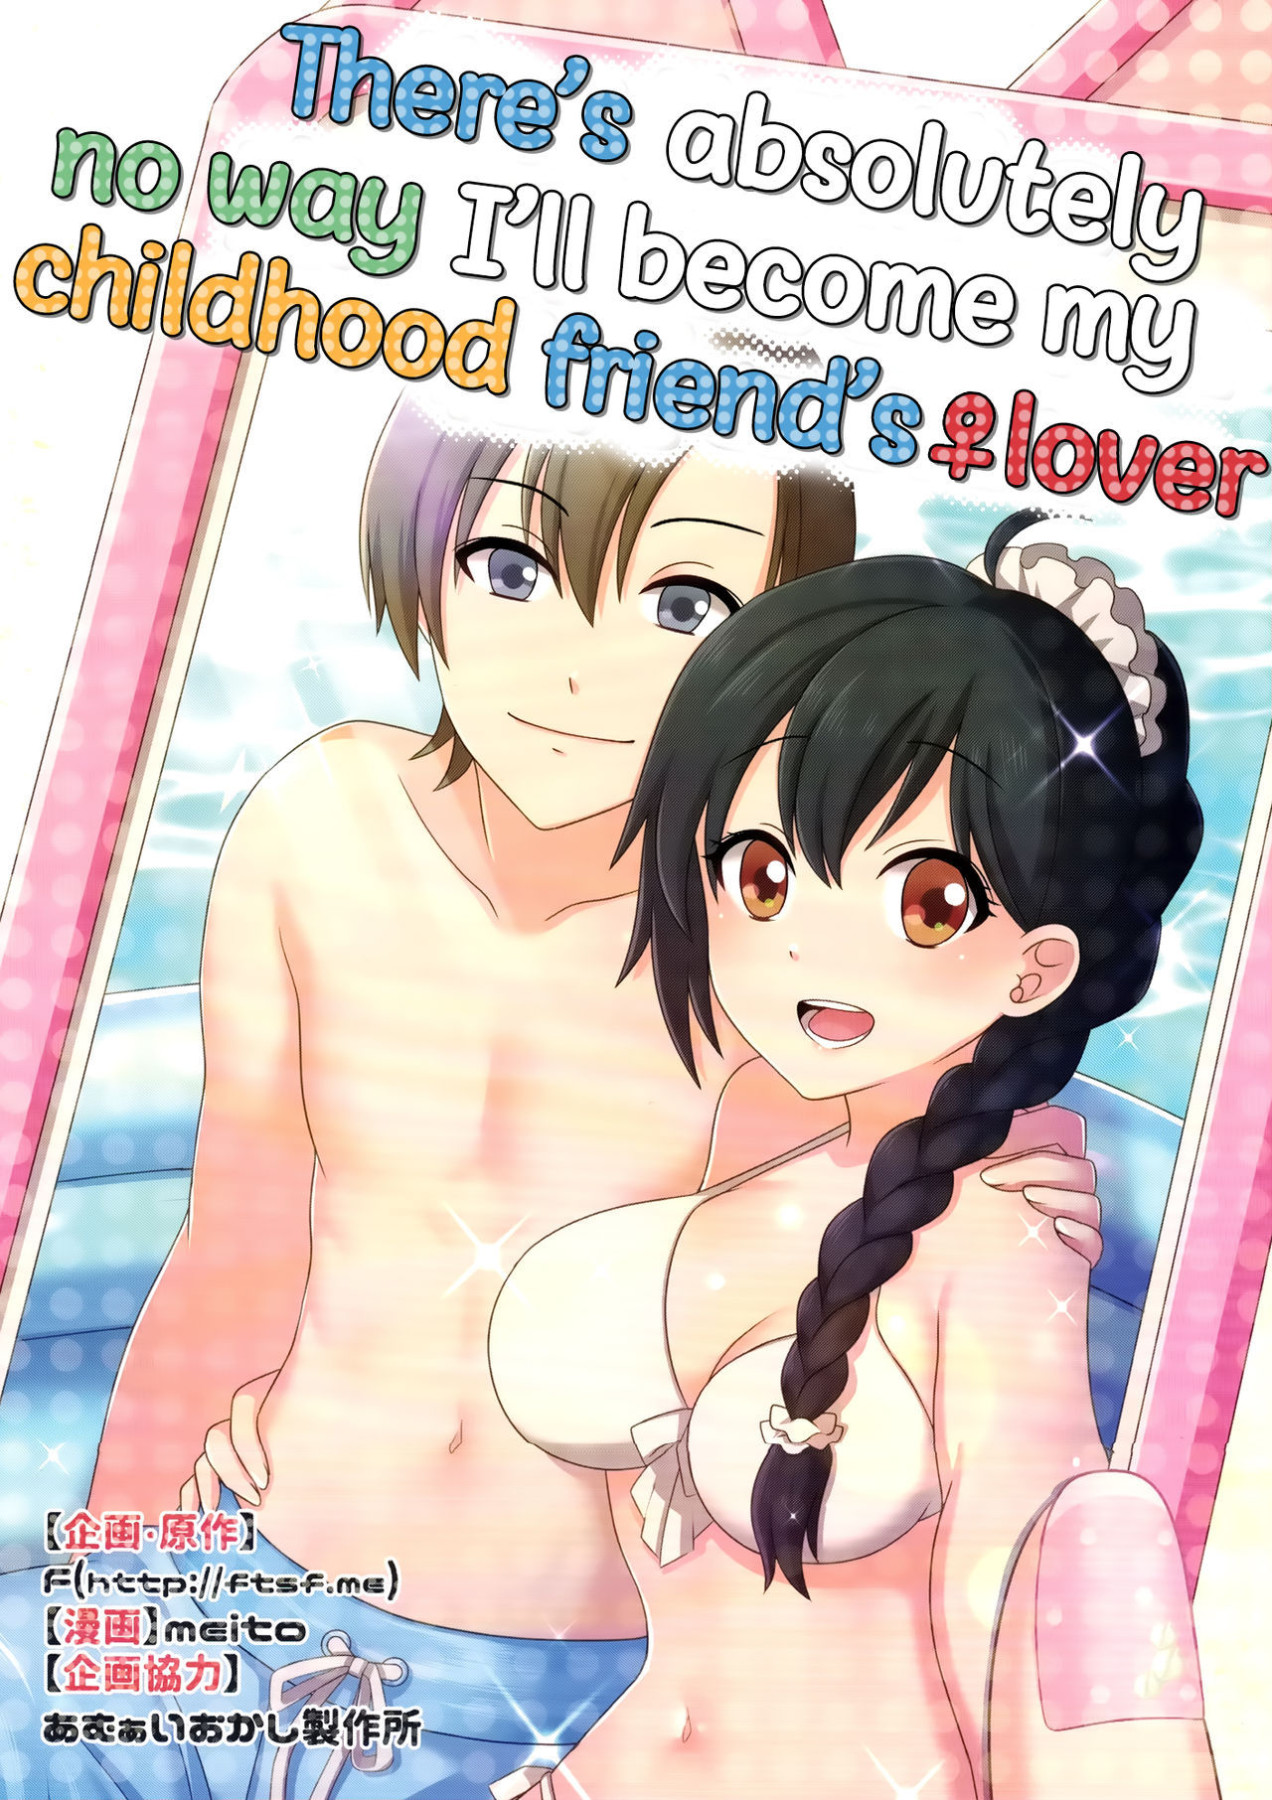 Hentai Manga Comic-There's Absolutely No Way I'll Become My Childhood Friend's Lover-Read-1